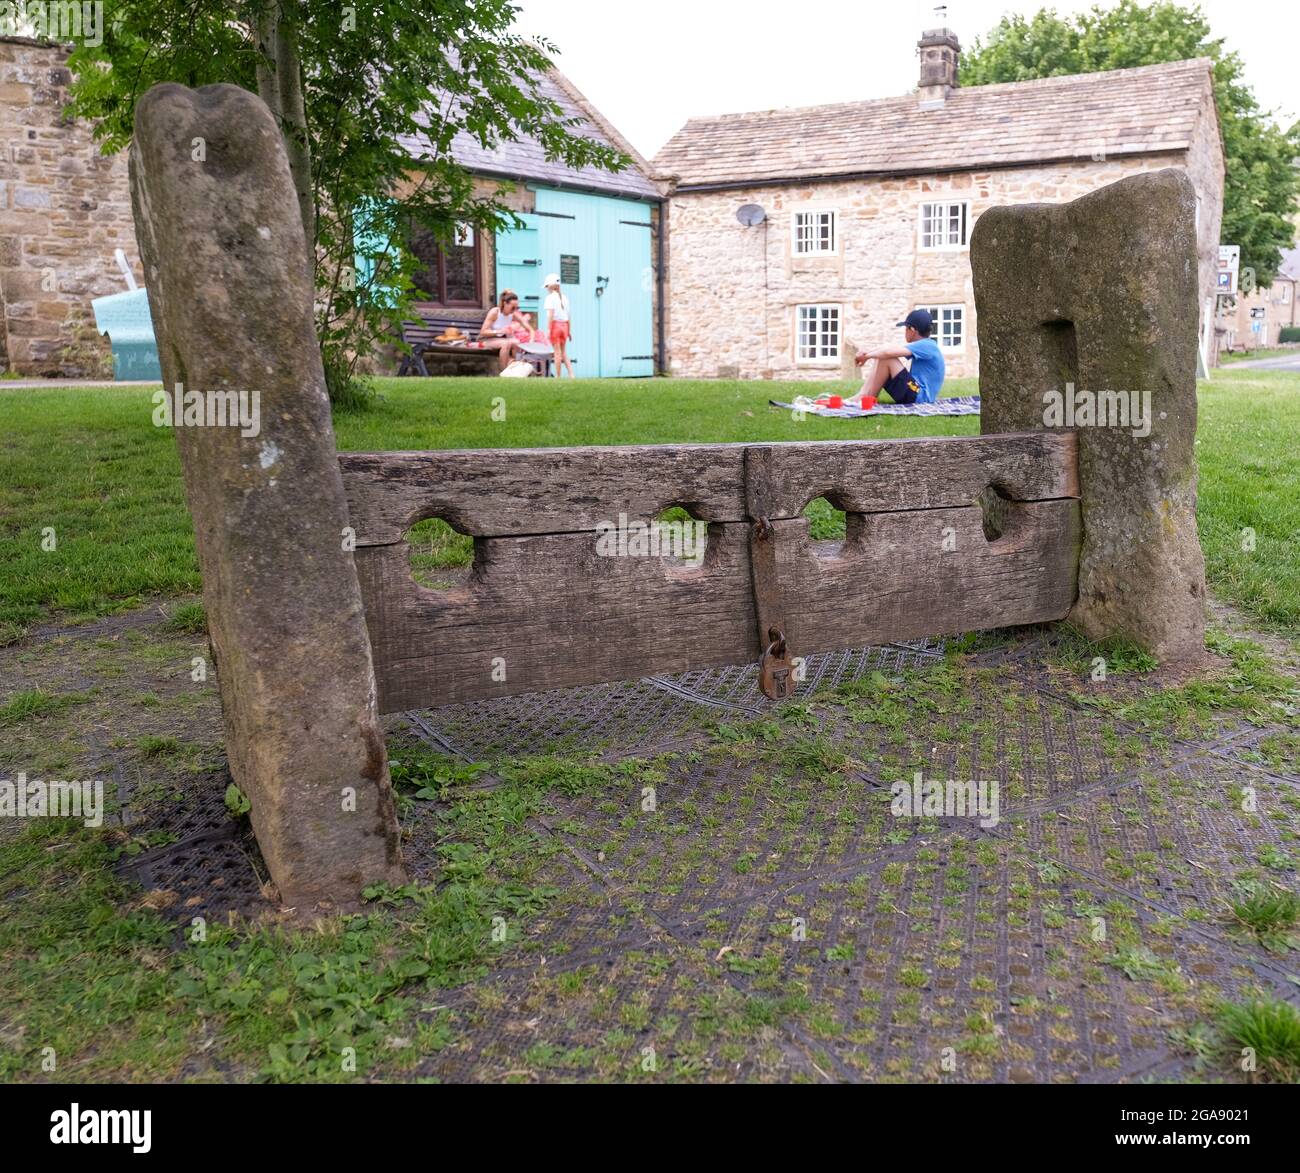 The wooden stocks in the Derbyshire plague village of Eyam. In the background are 2 children playing on the green enclosed by 2 stone buildings. Stock Photo